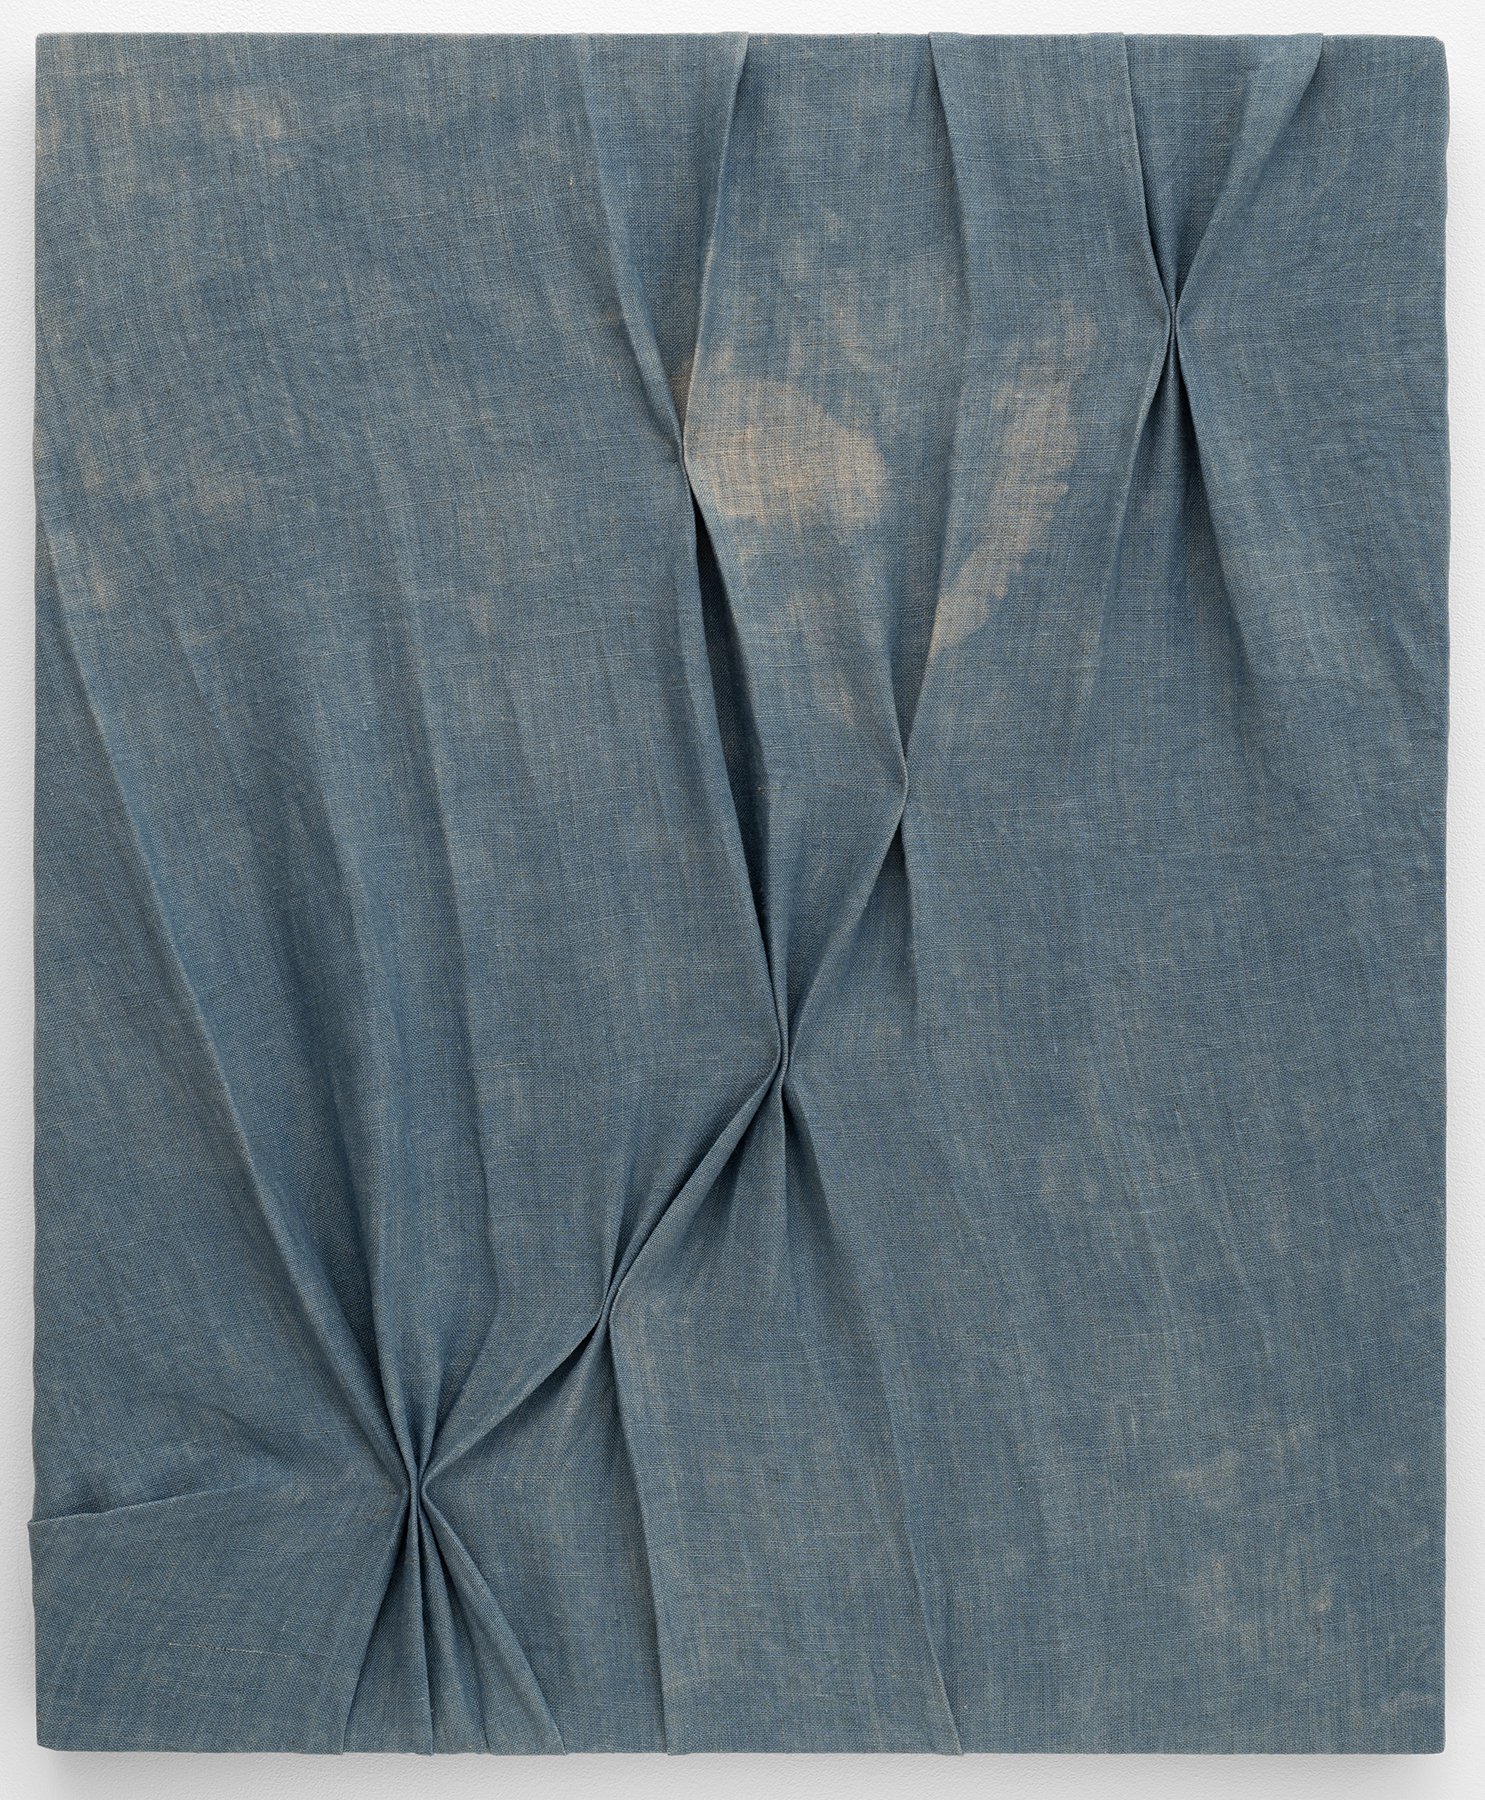   I See the Clouds , 2022                                                                                               Indigo dyed linen, stitched                                                                                                     22